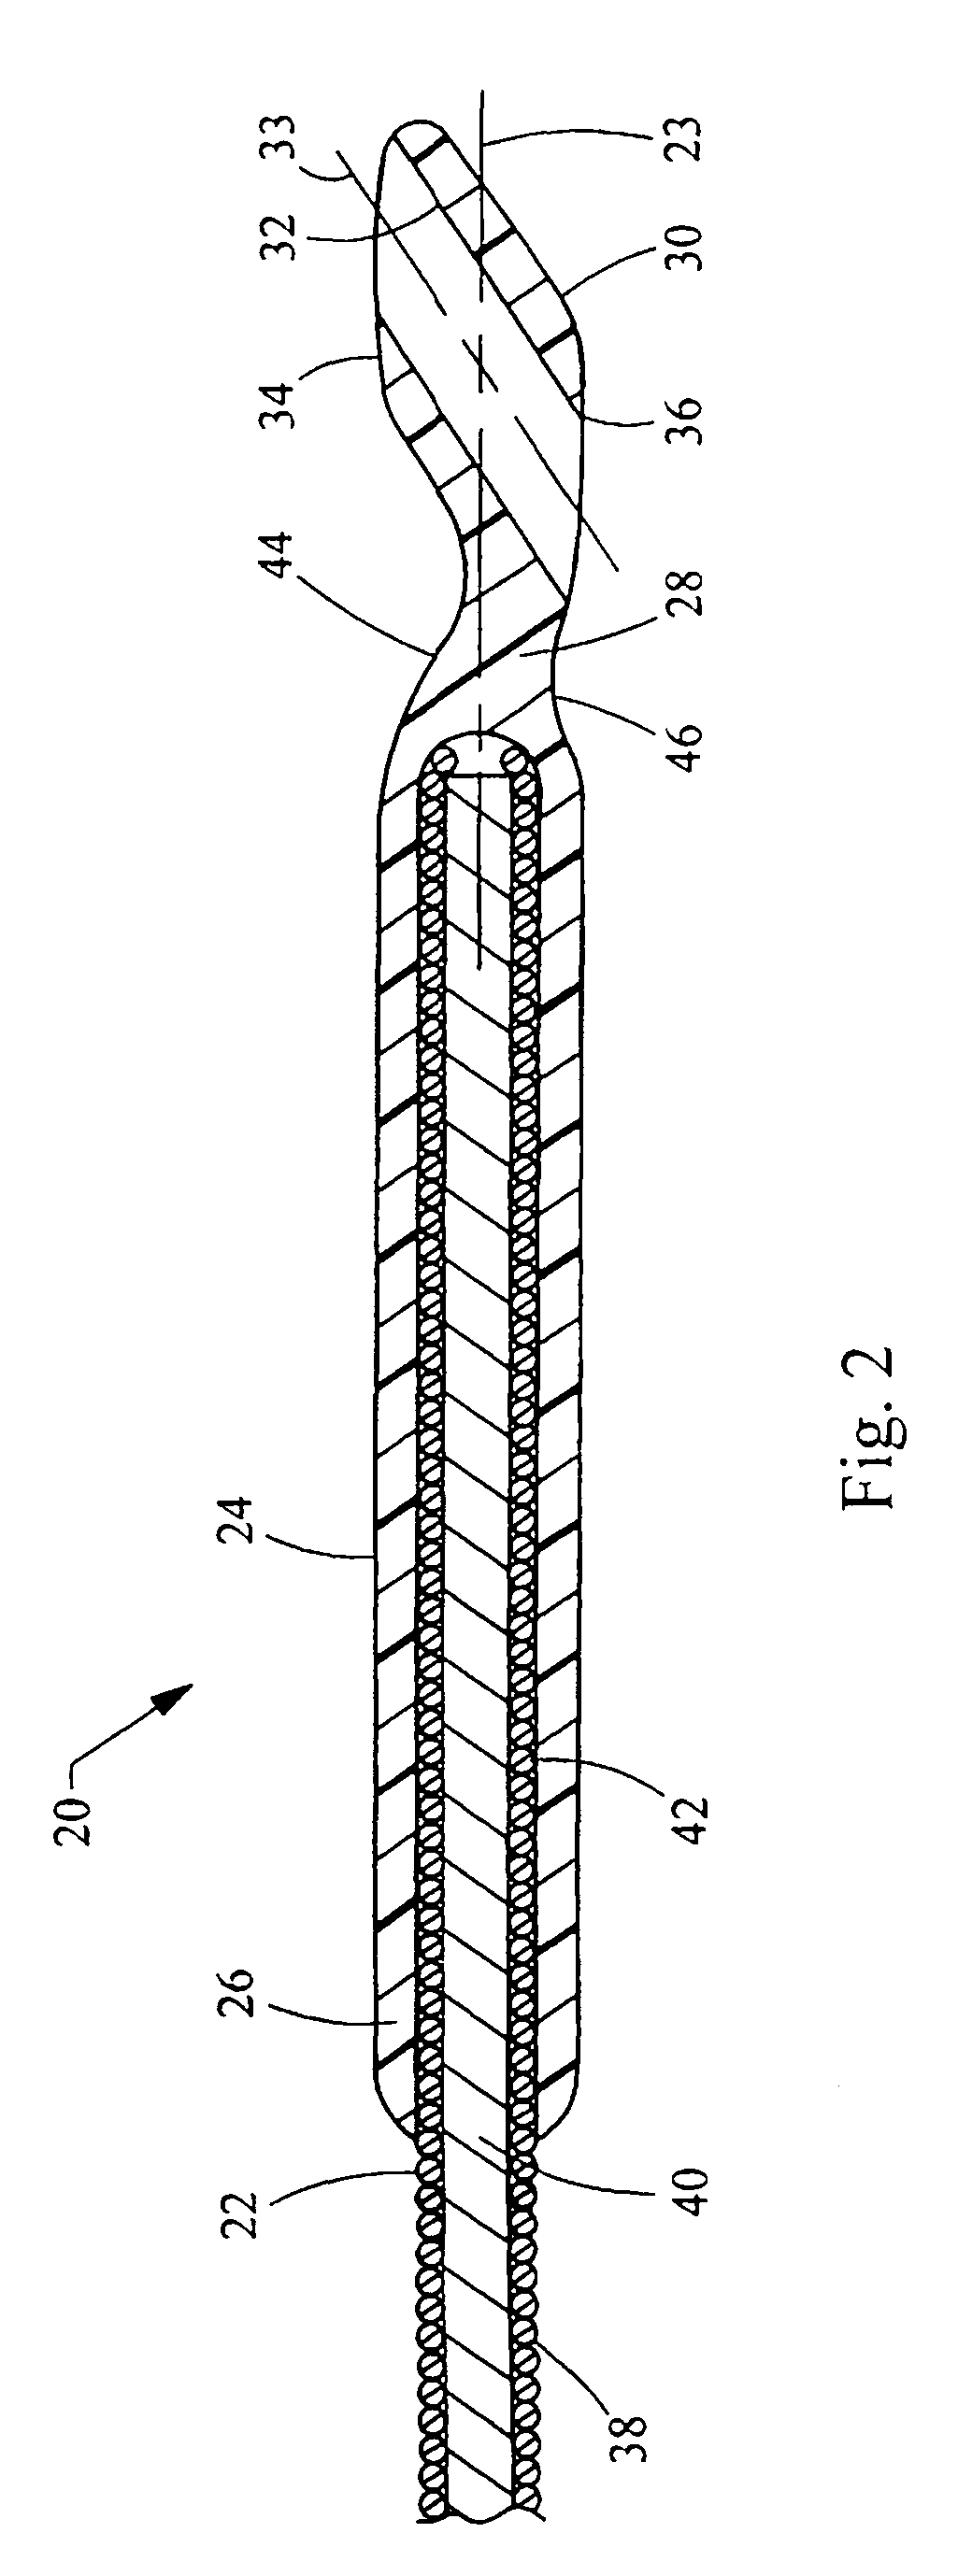 Wire guide having distal coupling tip